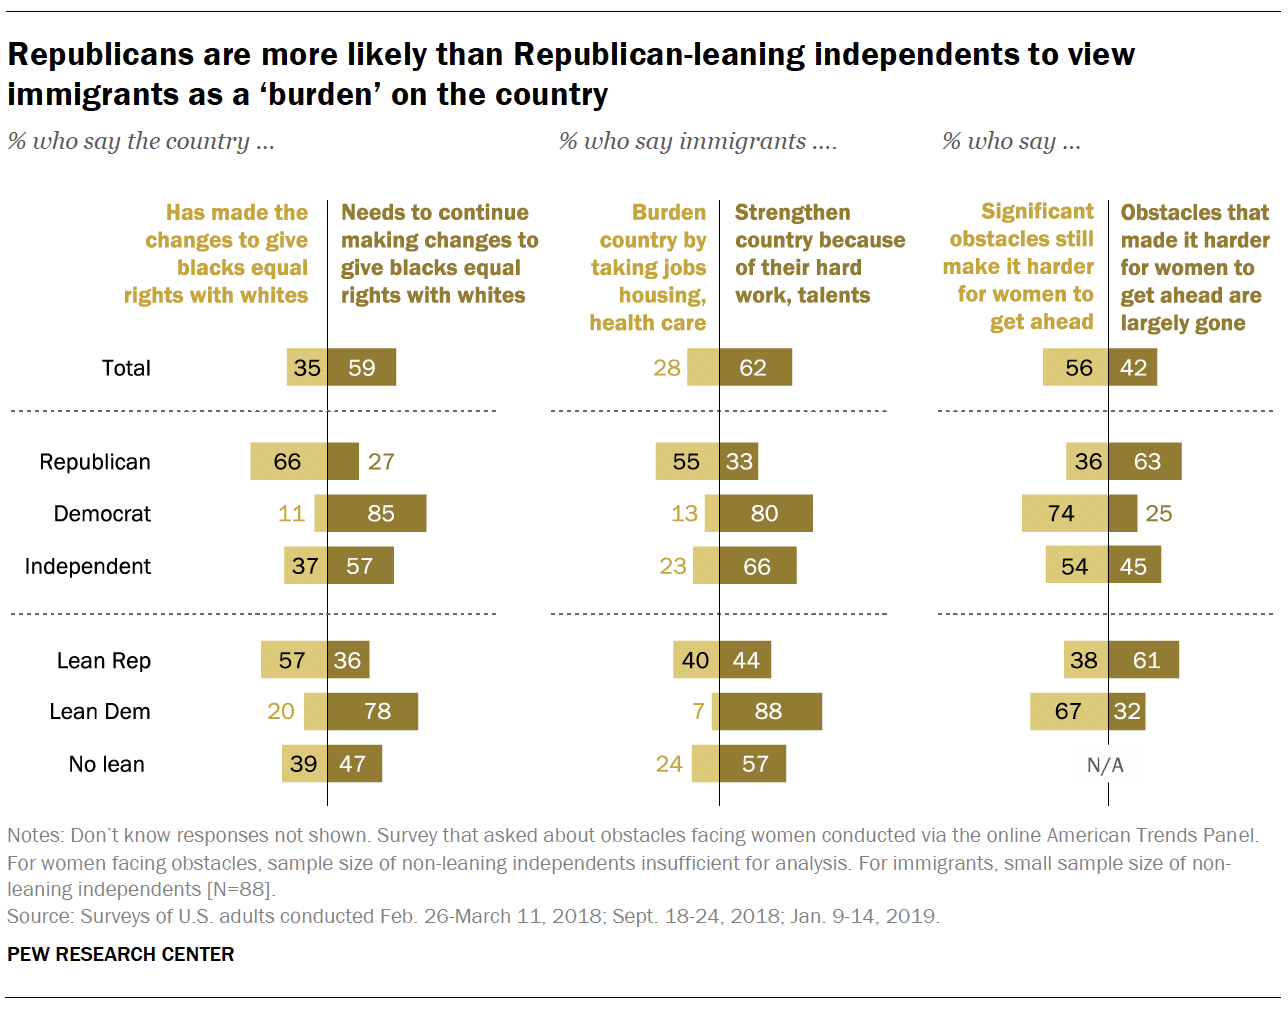 Republicans are more likely than Republican-leaning independents to view immigrants as a ‘burden’ on the country